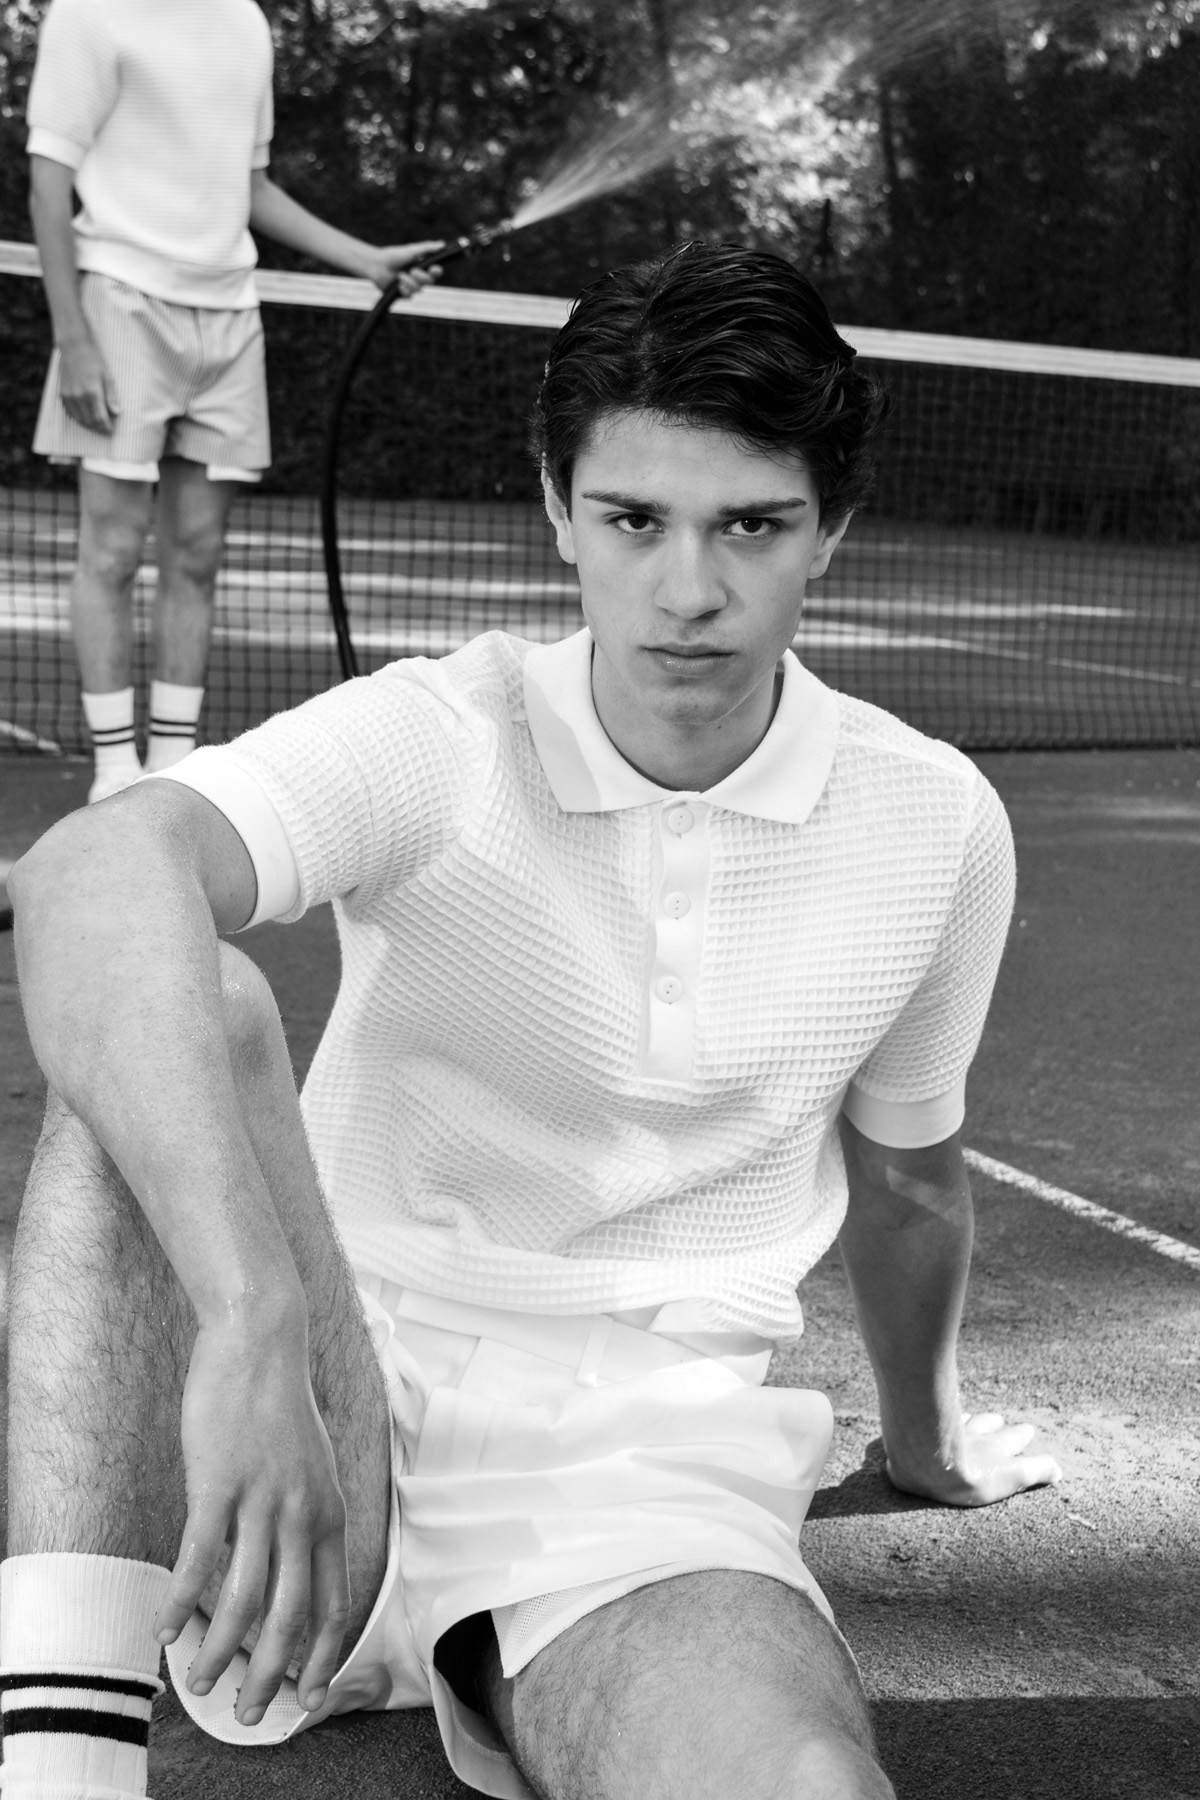 the-campaign-to-make-tennis-chic-again-starts-here-03